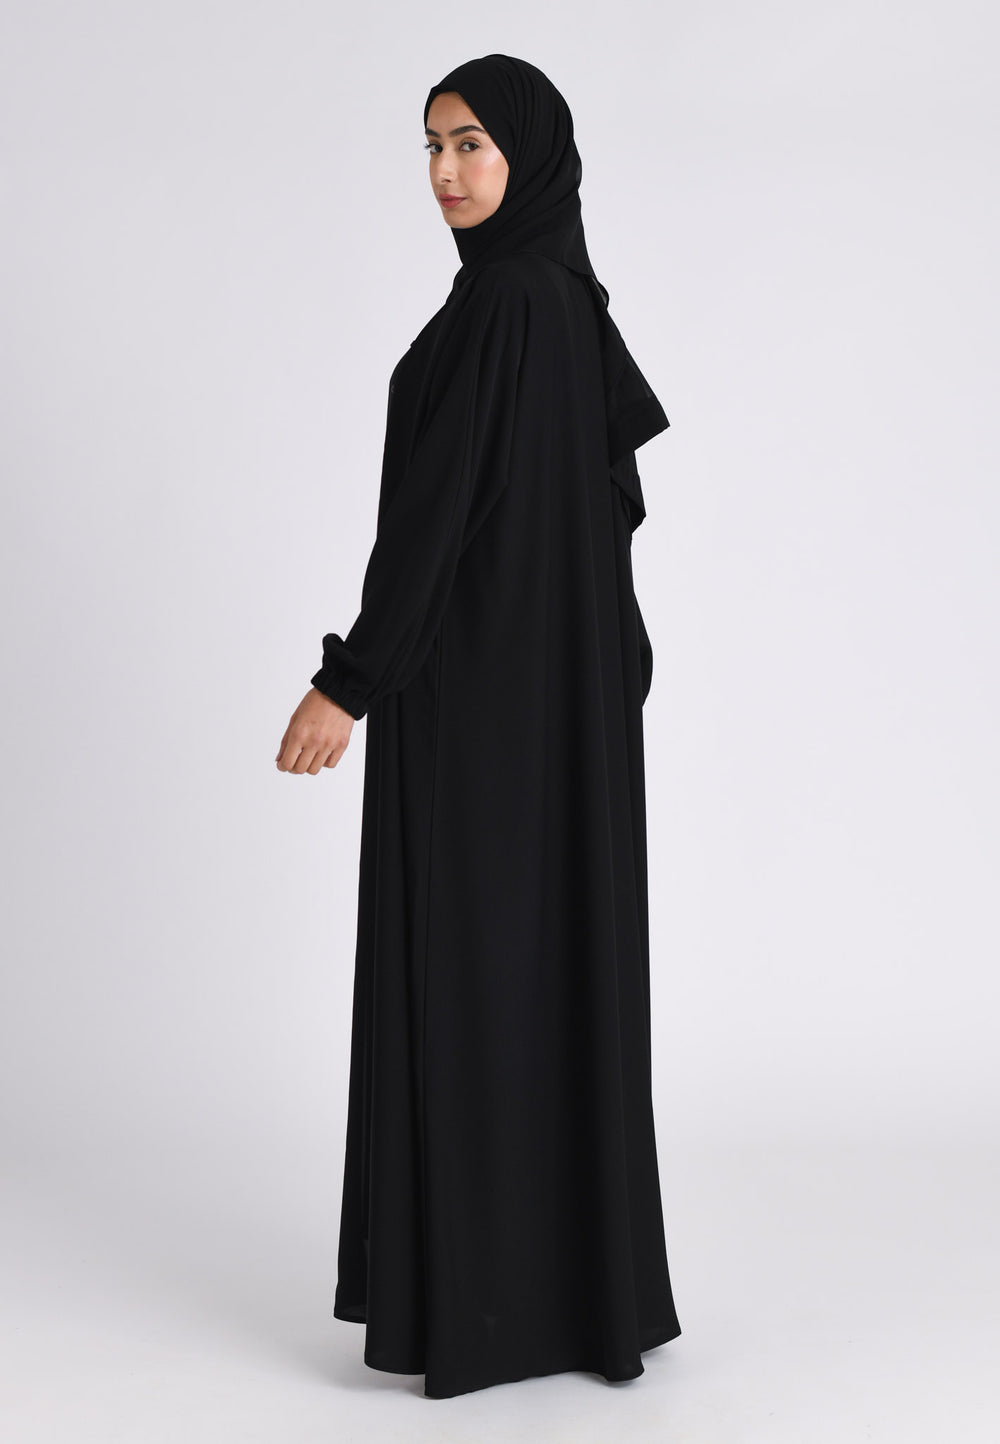 Plain Black Open Abaya With Cuff Sleeves